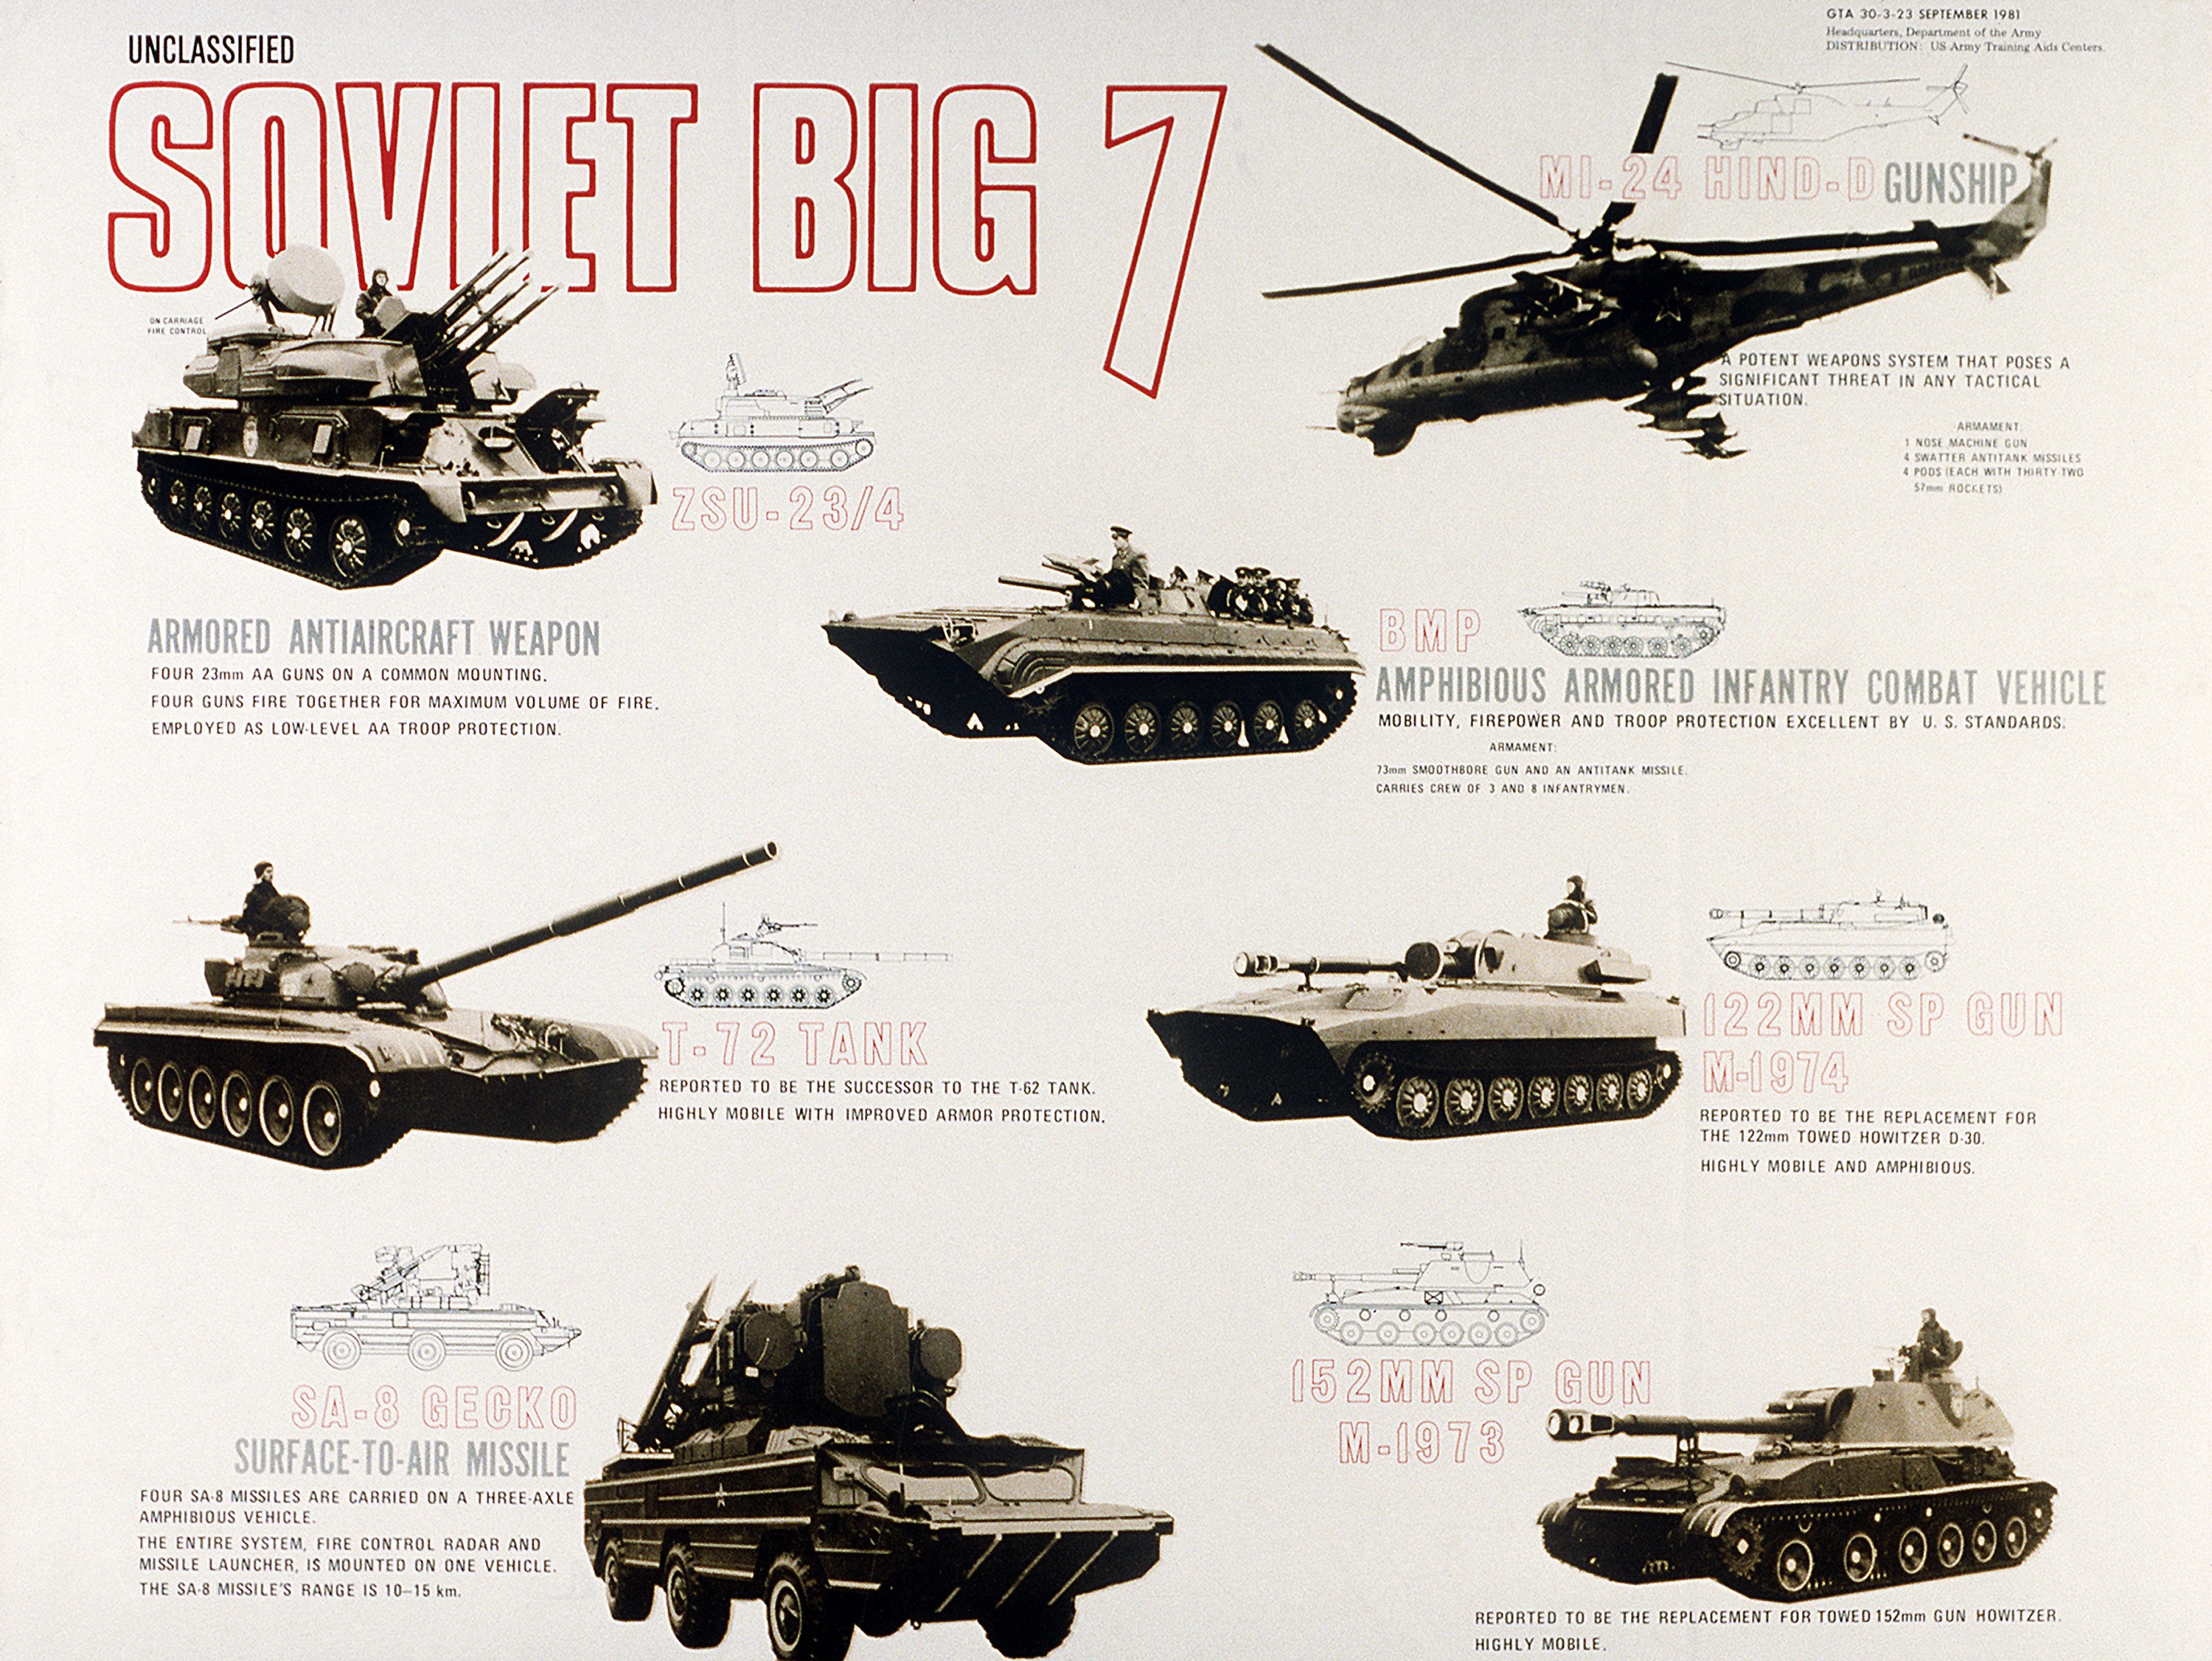 General 3000x2253 Warsaw Pact USSR weapon tank helicopters T-72 Mil Mi-24 APC military infographics vehicle military vehicle Soviet Army AFV infantry fighting vehicle armor poster ZSU-23-4 Shilka BMP-1 Cold War Russian/Soviet tanks Russian/Soviet aircraft